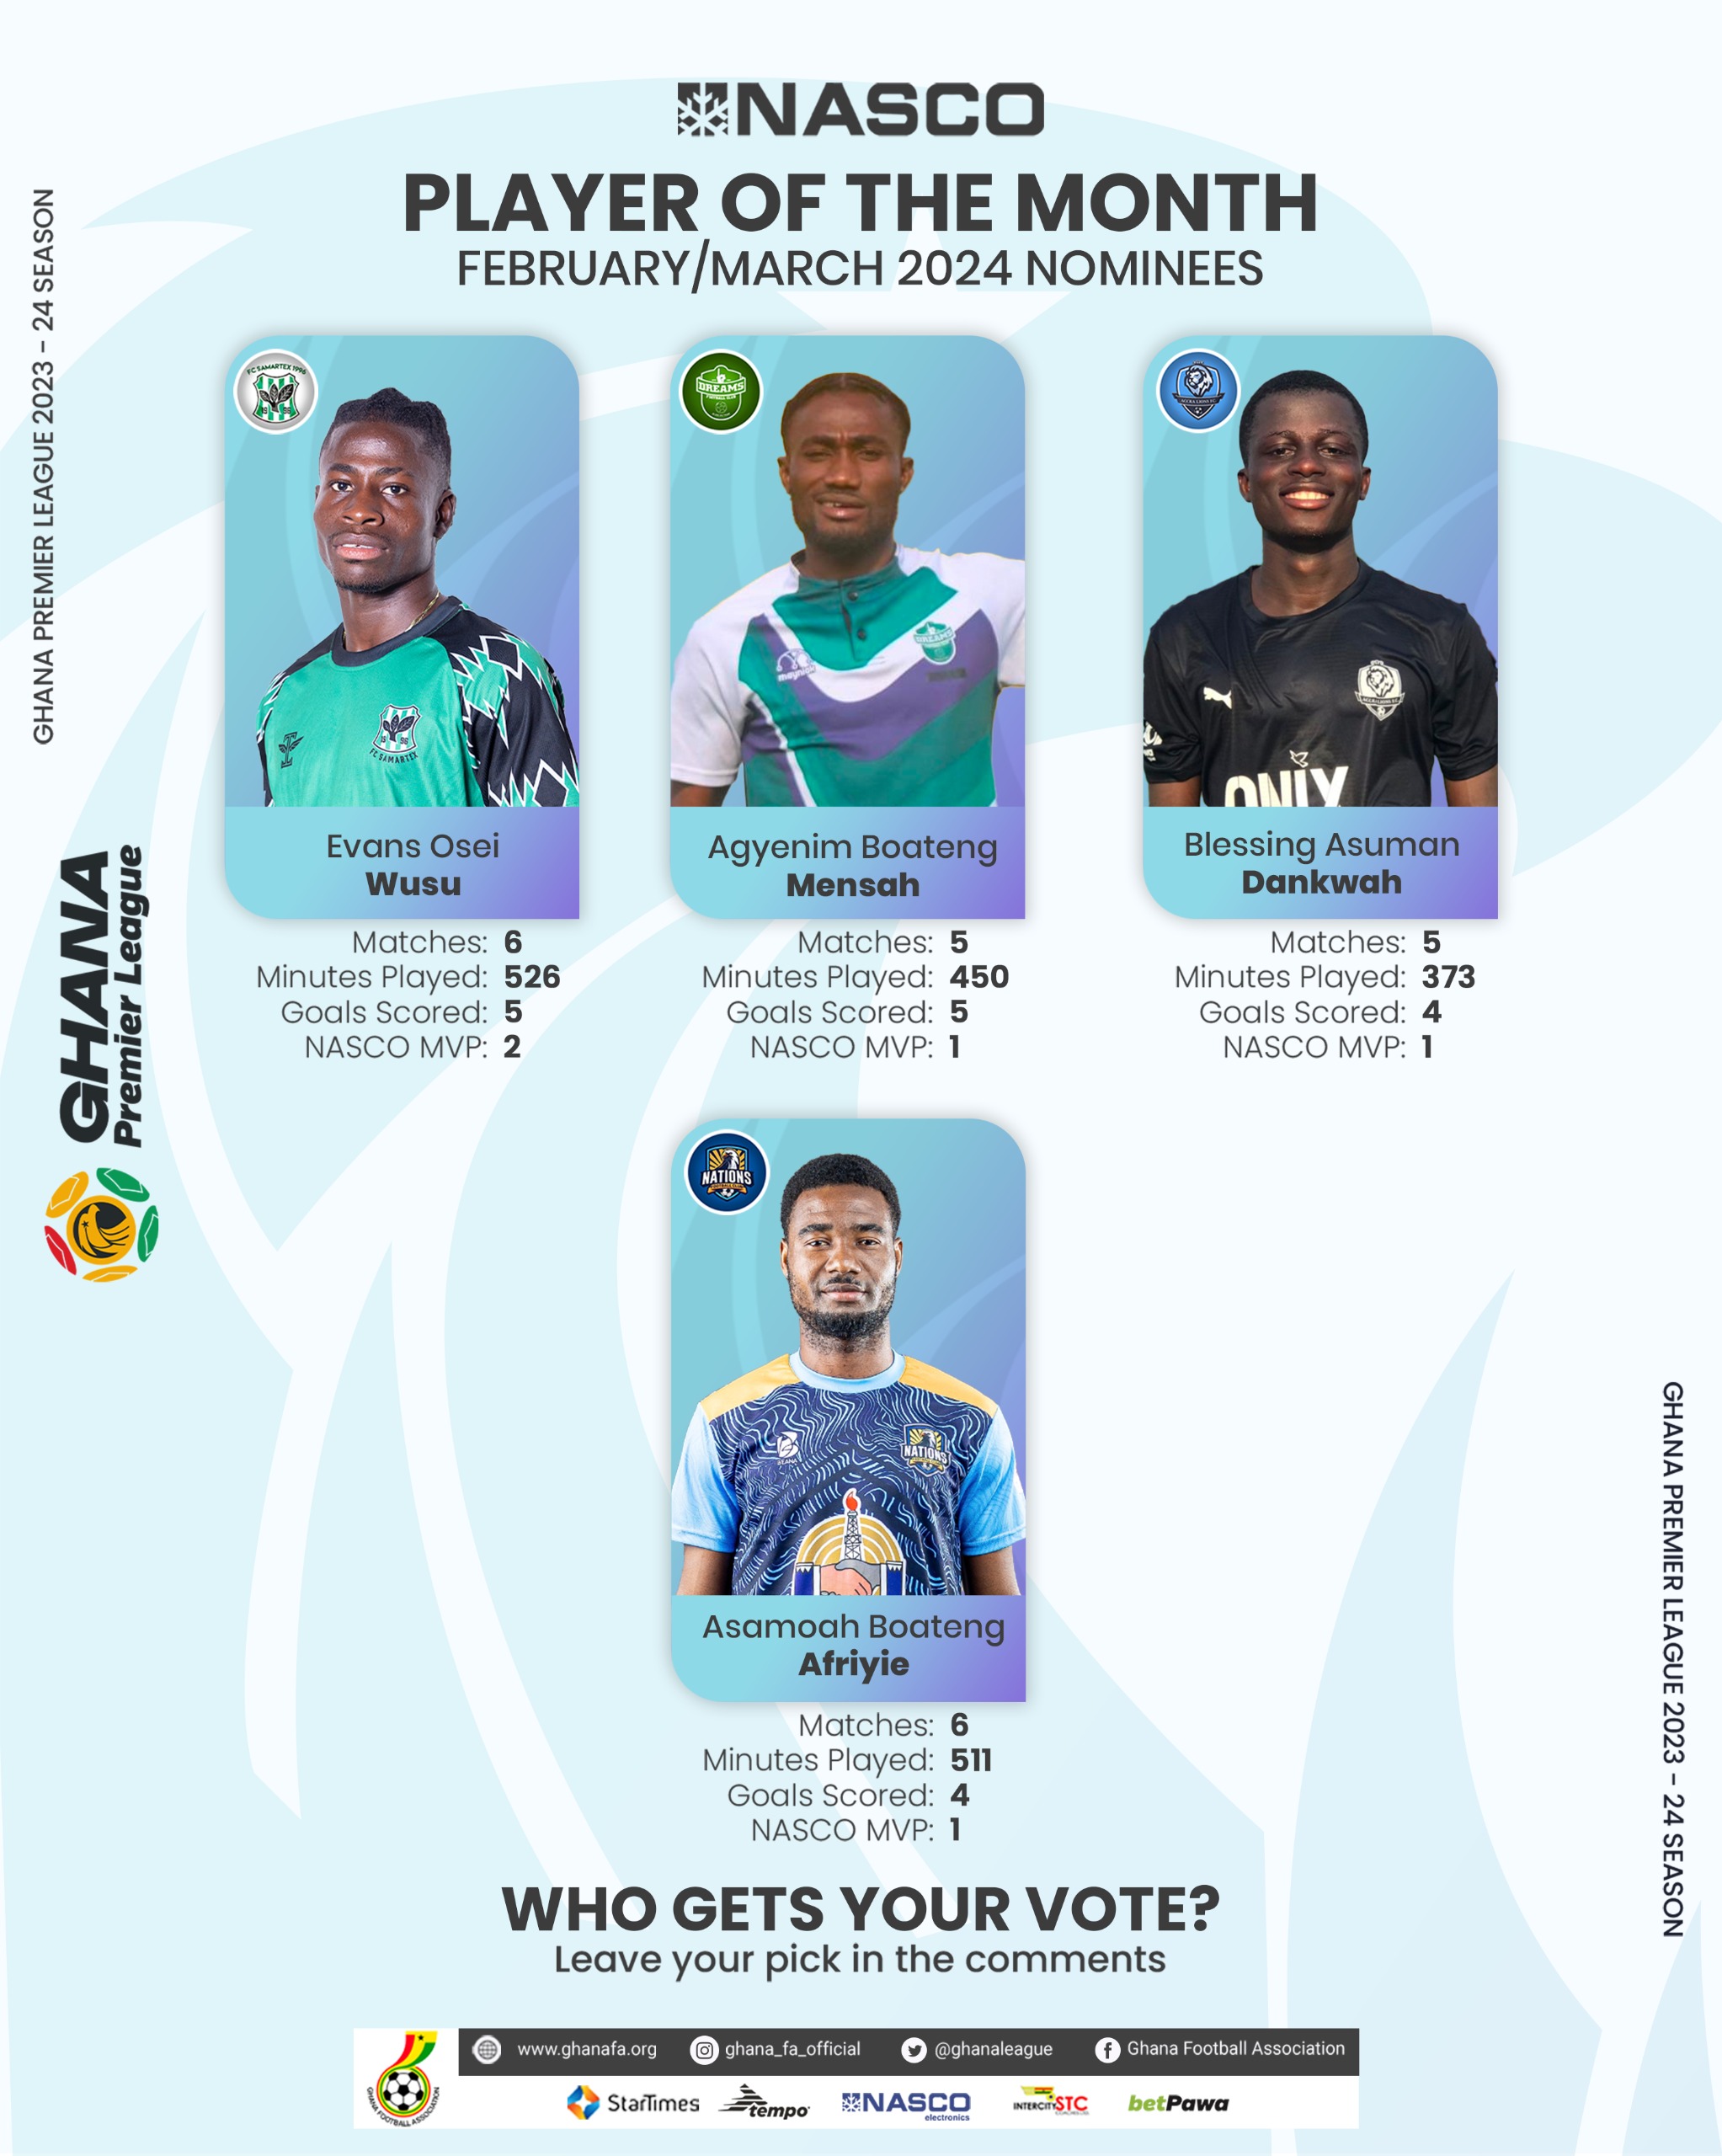 Four outstanding Players make shortlist for NASCO Monthly award for February-March 2024